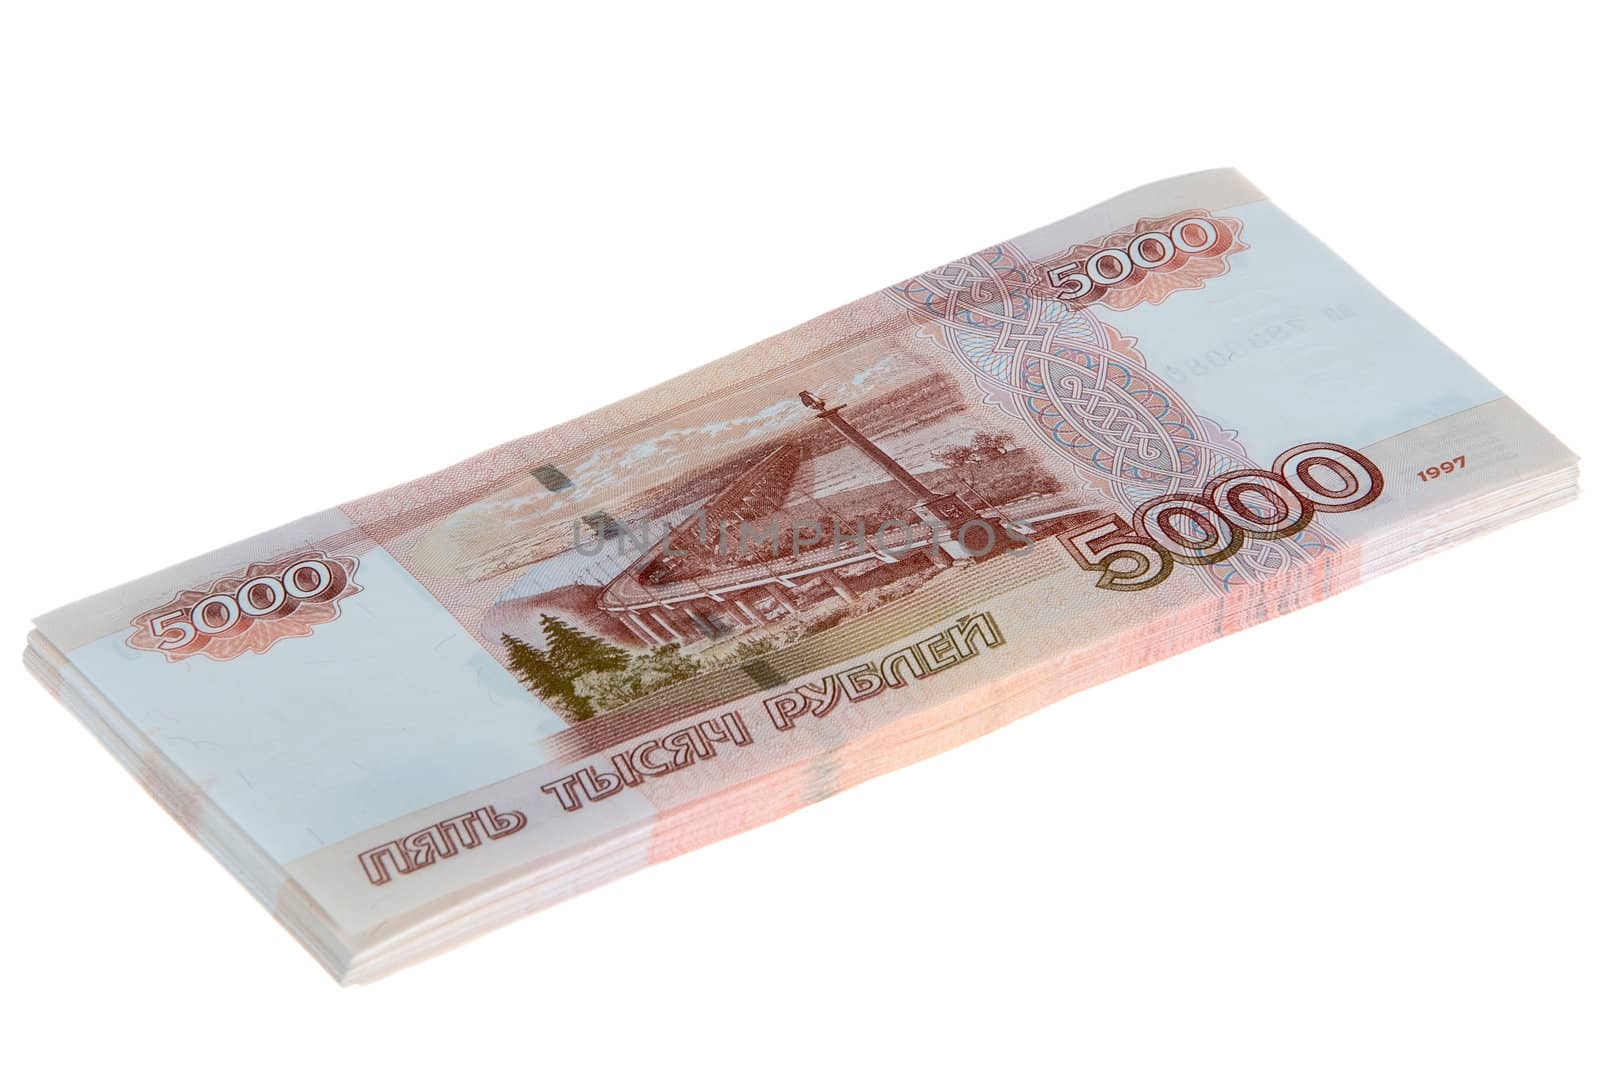 Five Thousand Roubles Bills Stacked  by Baltus